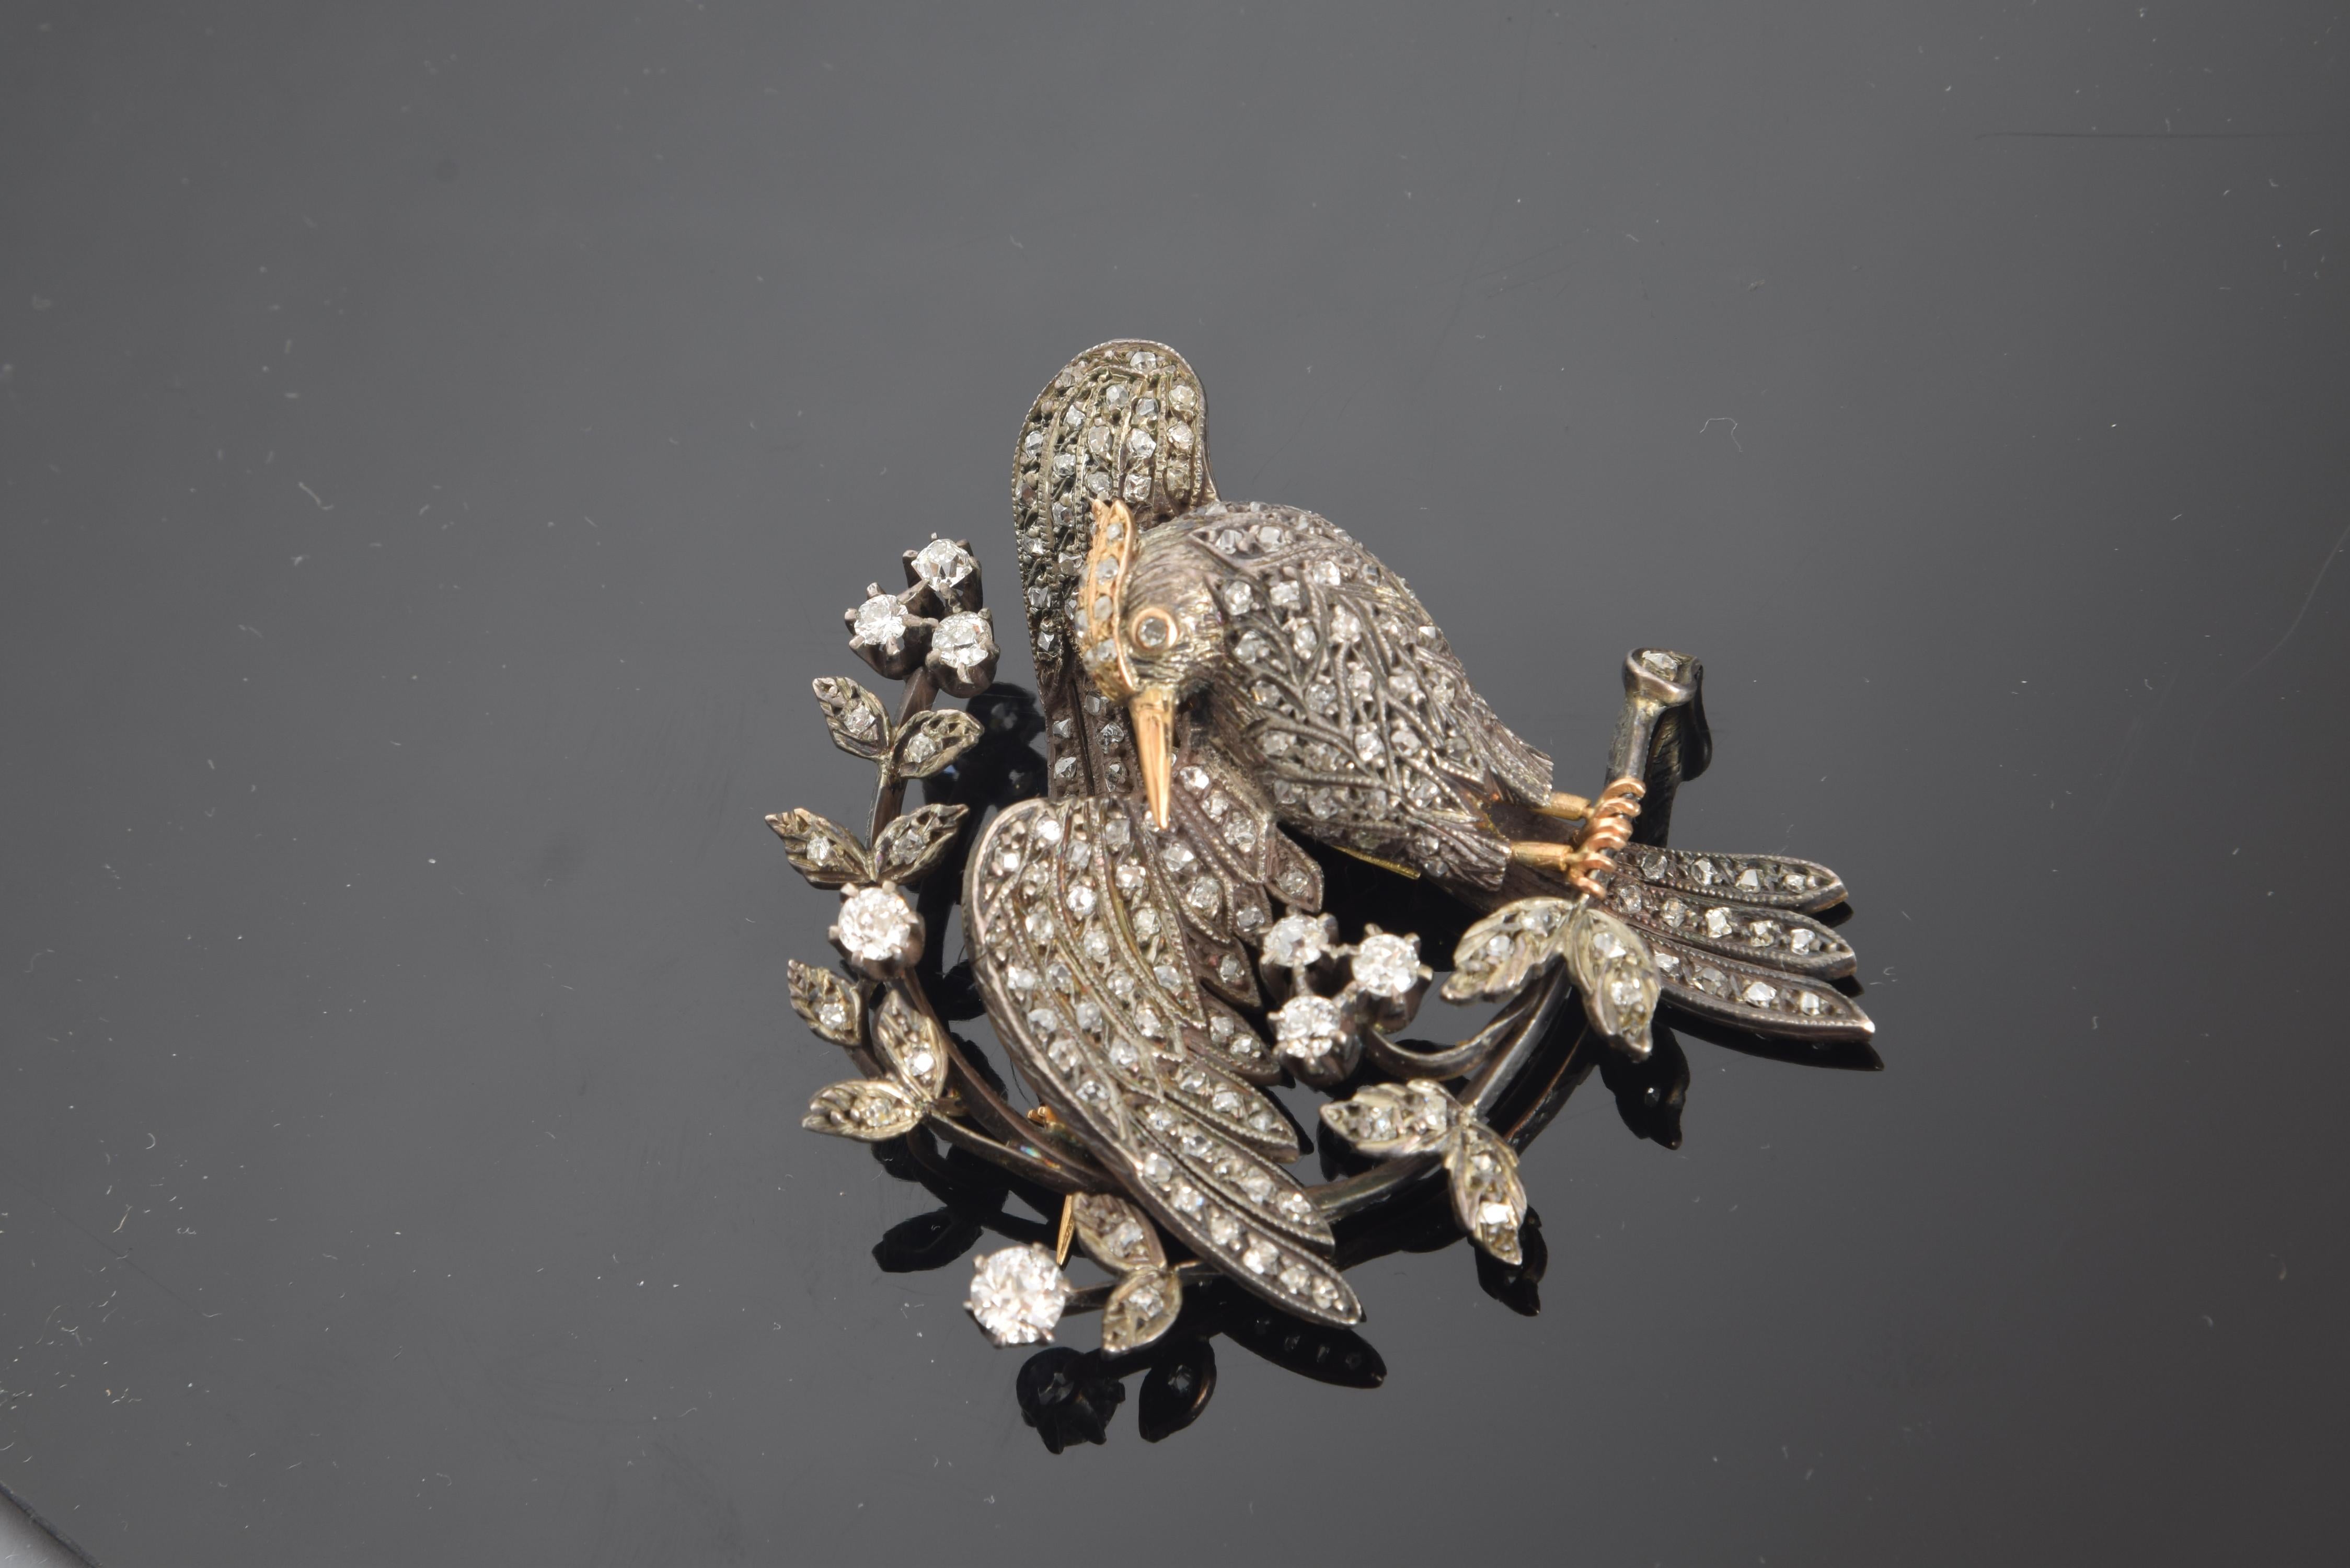 Gold and white gold and brilliant cut diamonds.
It has been represented in this jewel a bird perched on a branch with flowers and leaves, preening a wing with the other also extended. It is made in white gold and that same metal in its color, and